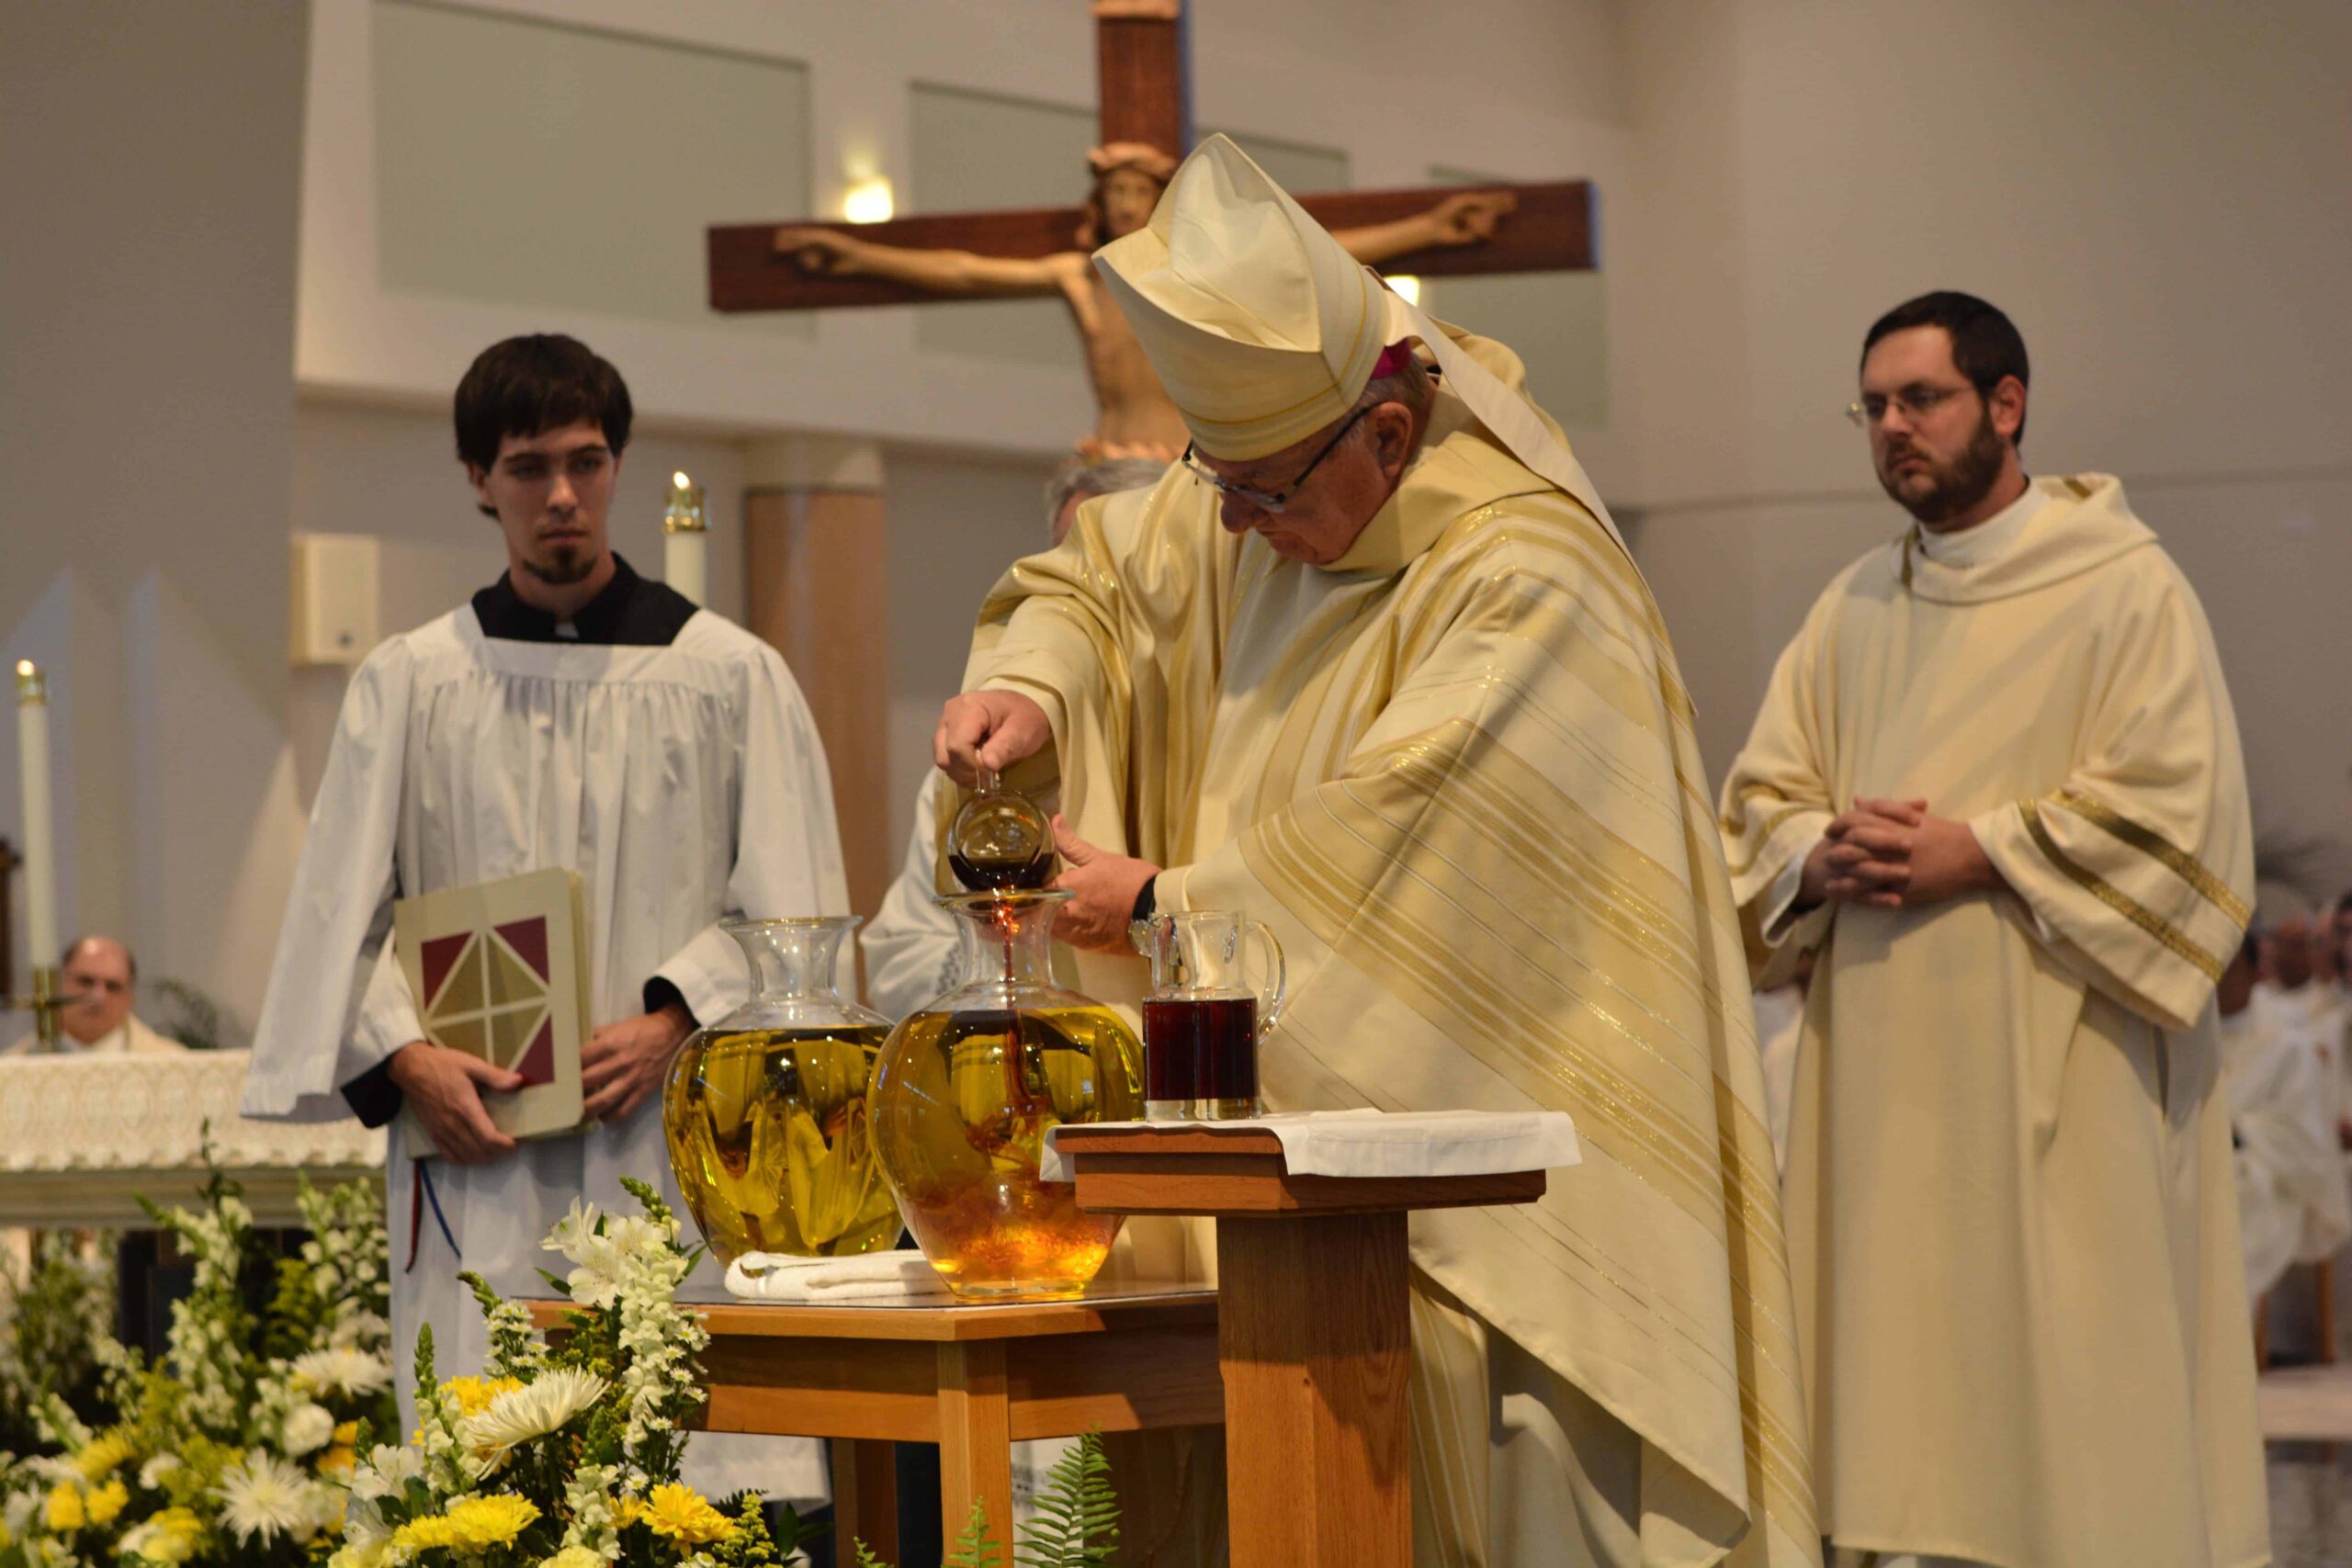 Bishop Lynch mixing olive oil and balsam before consecration. Photo credit: Maria Mertens